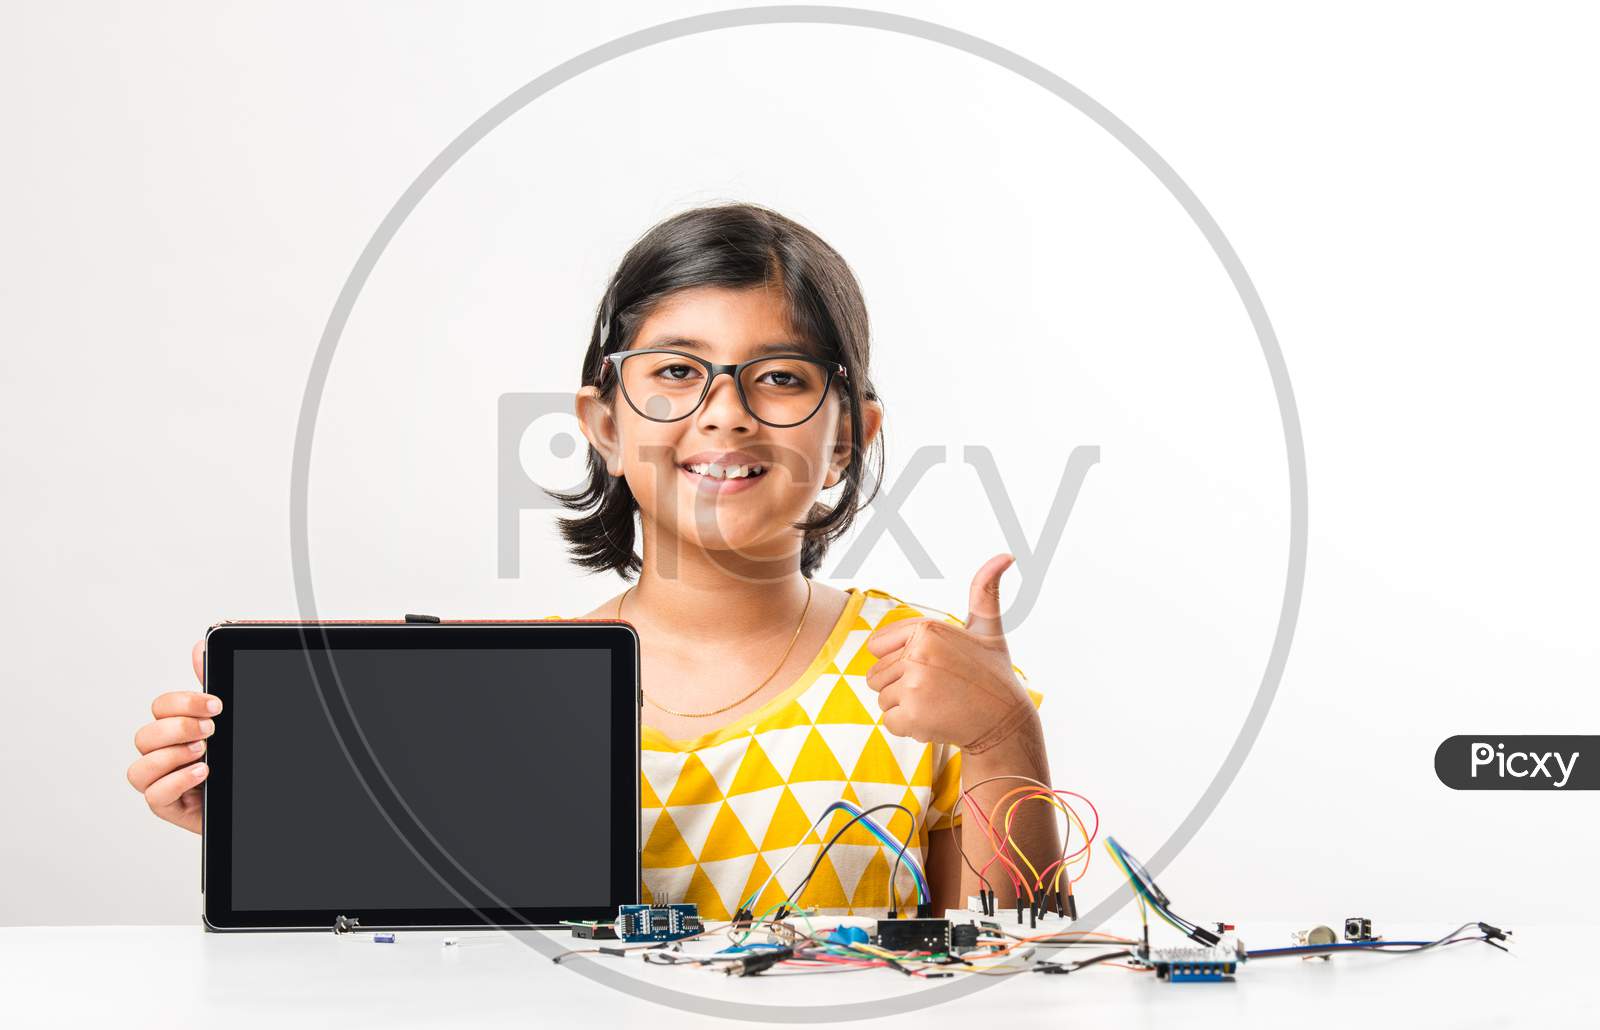 Electronic Experiment - Indian Girl Student Working With Wires And Connections Inventing Something